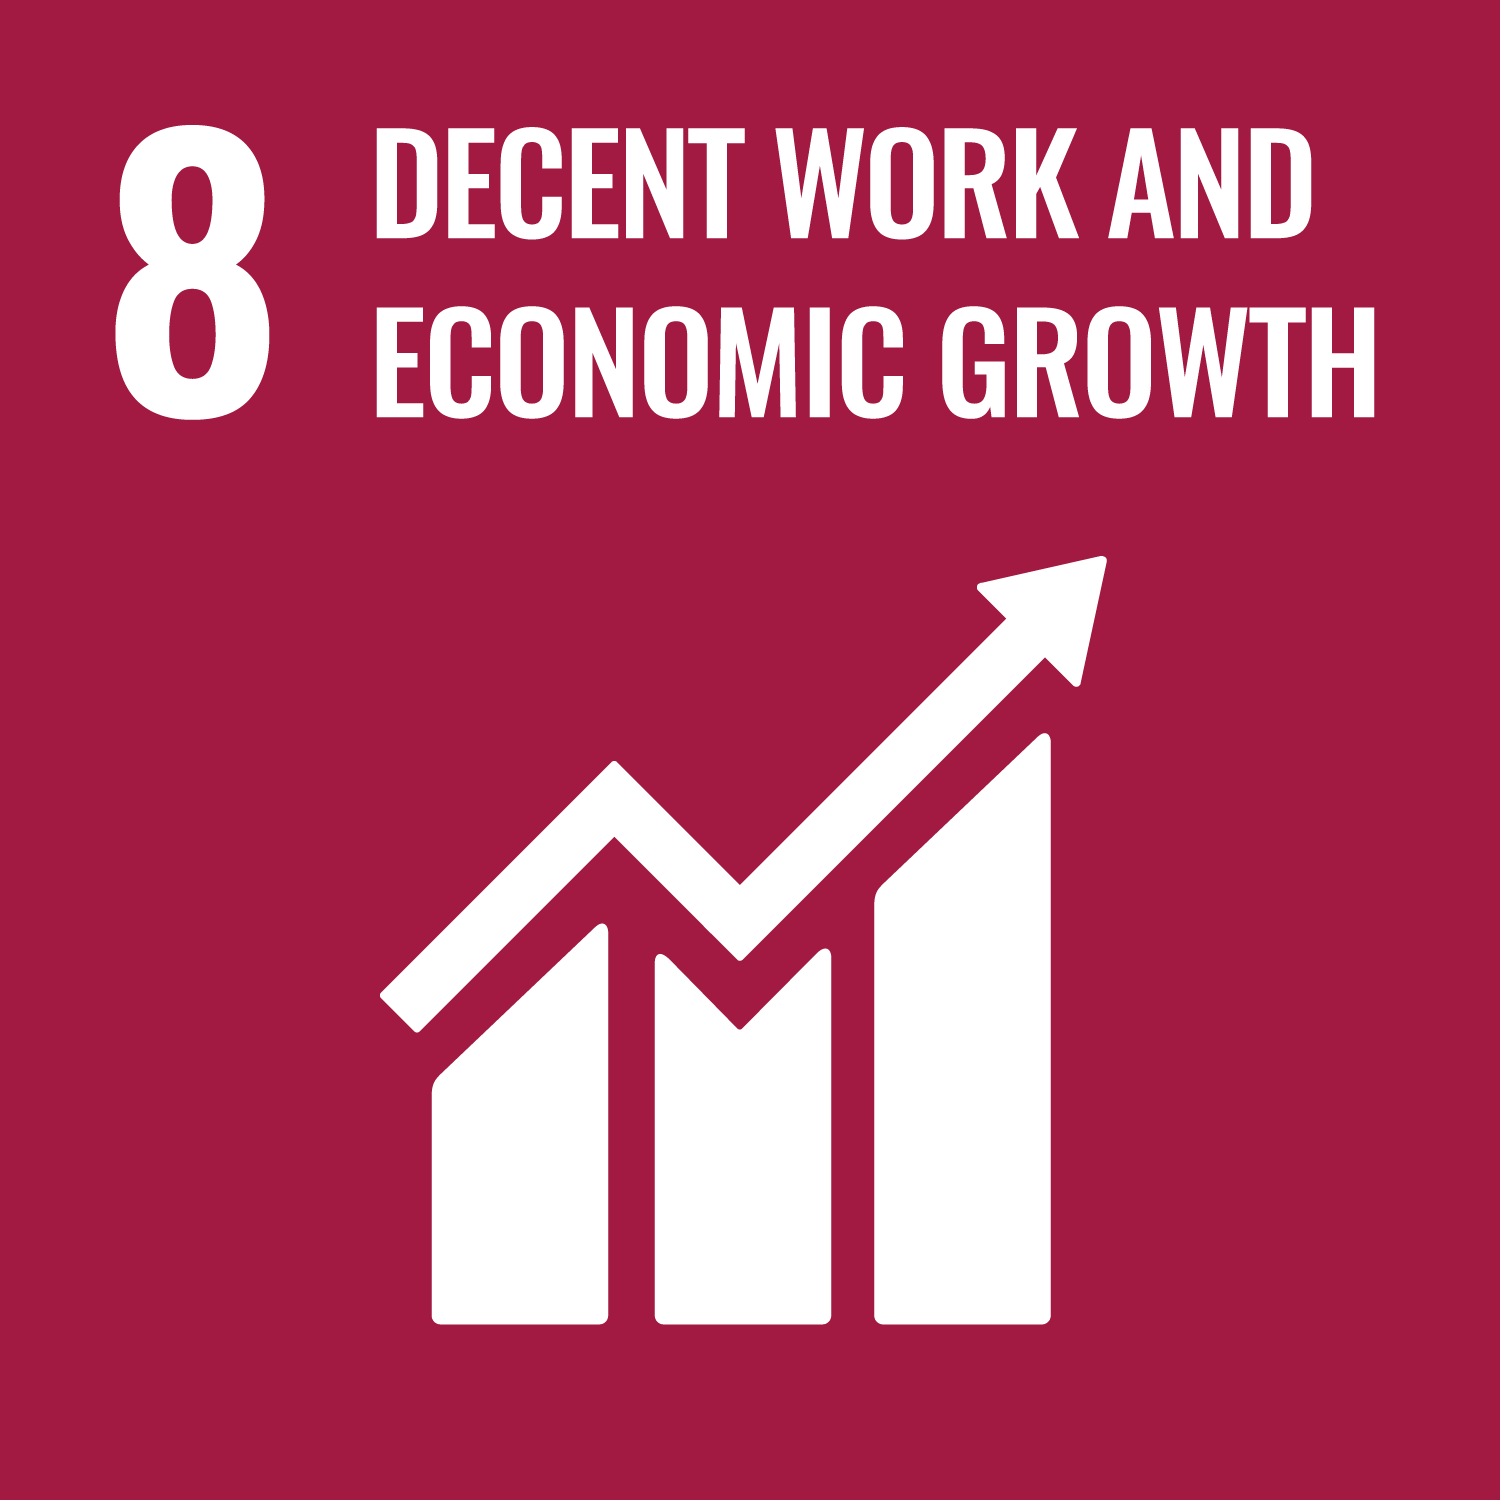 Goal number 8: Decent work and economic growth